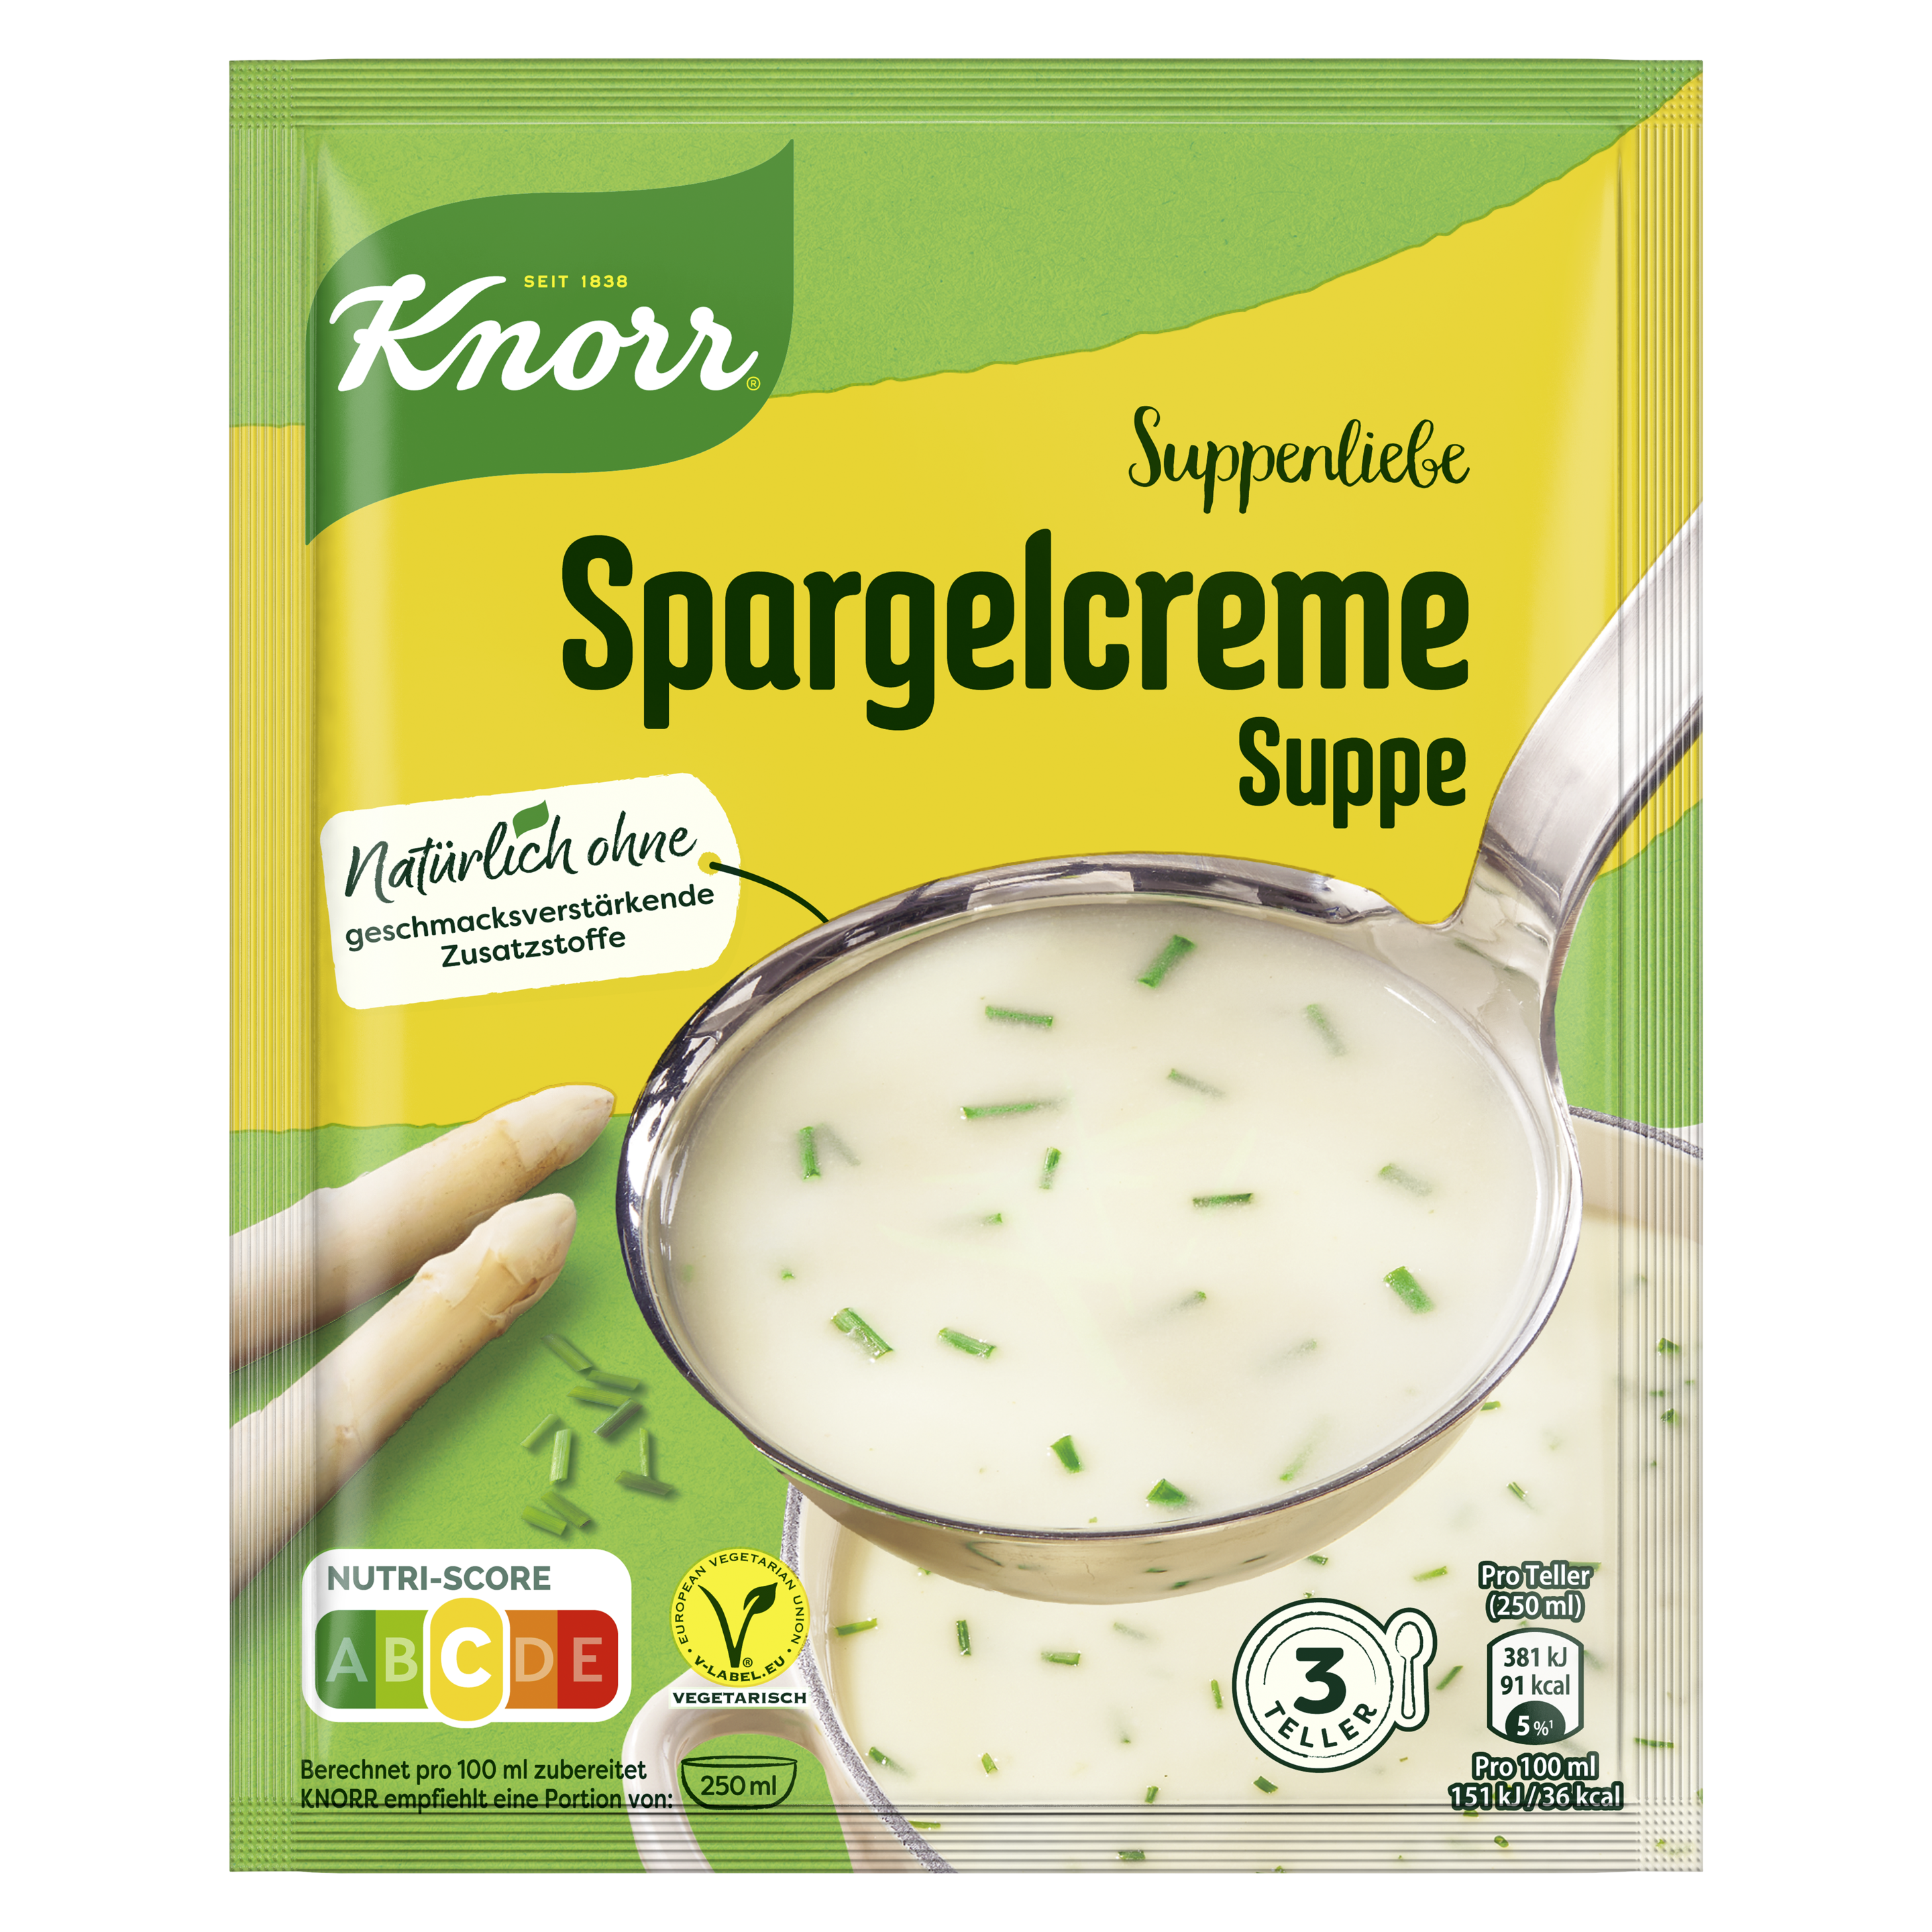 Knorr Suppenliebe Spargelcreme Suppe 750ml Beutel